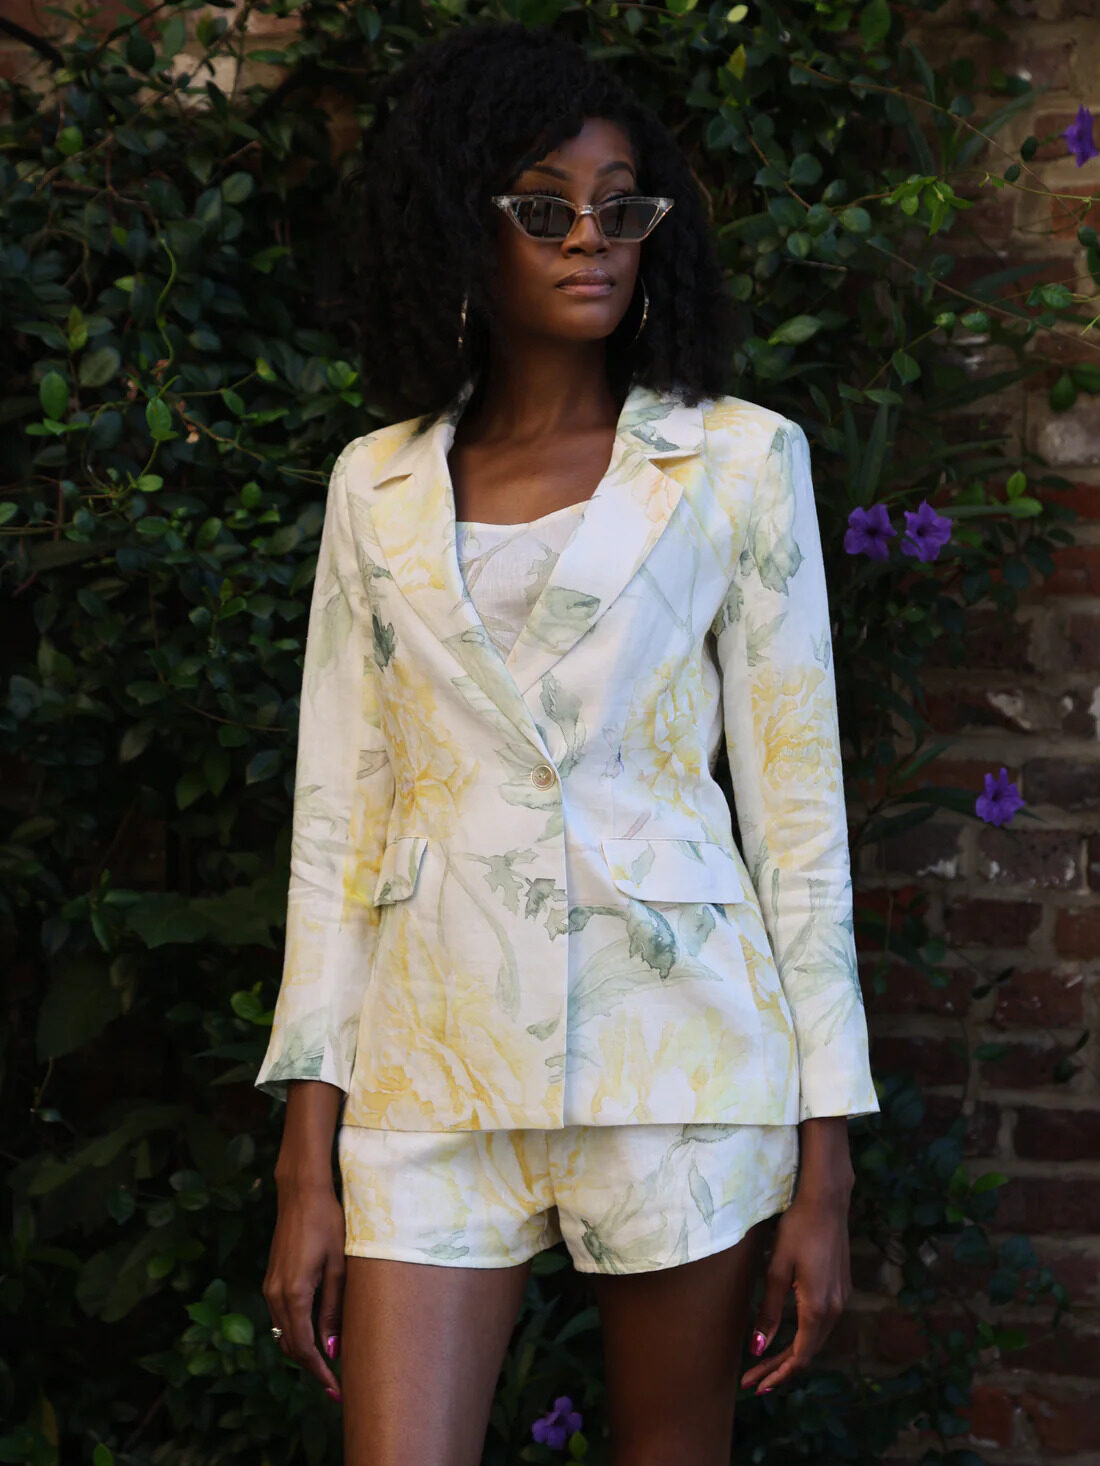 A model in sunglasses wearing FLORA By Alexandria's Rosalie Blazer and matching shorts.